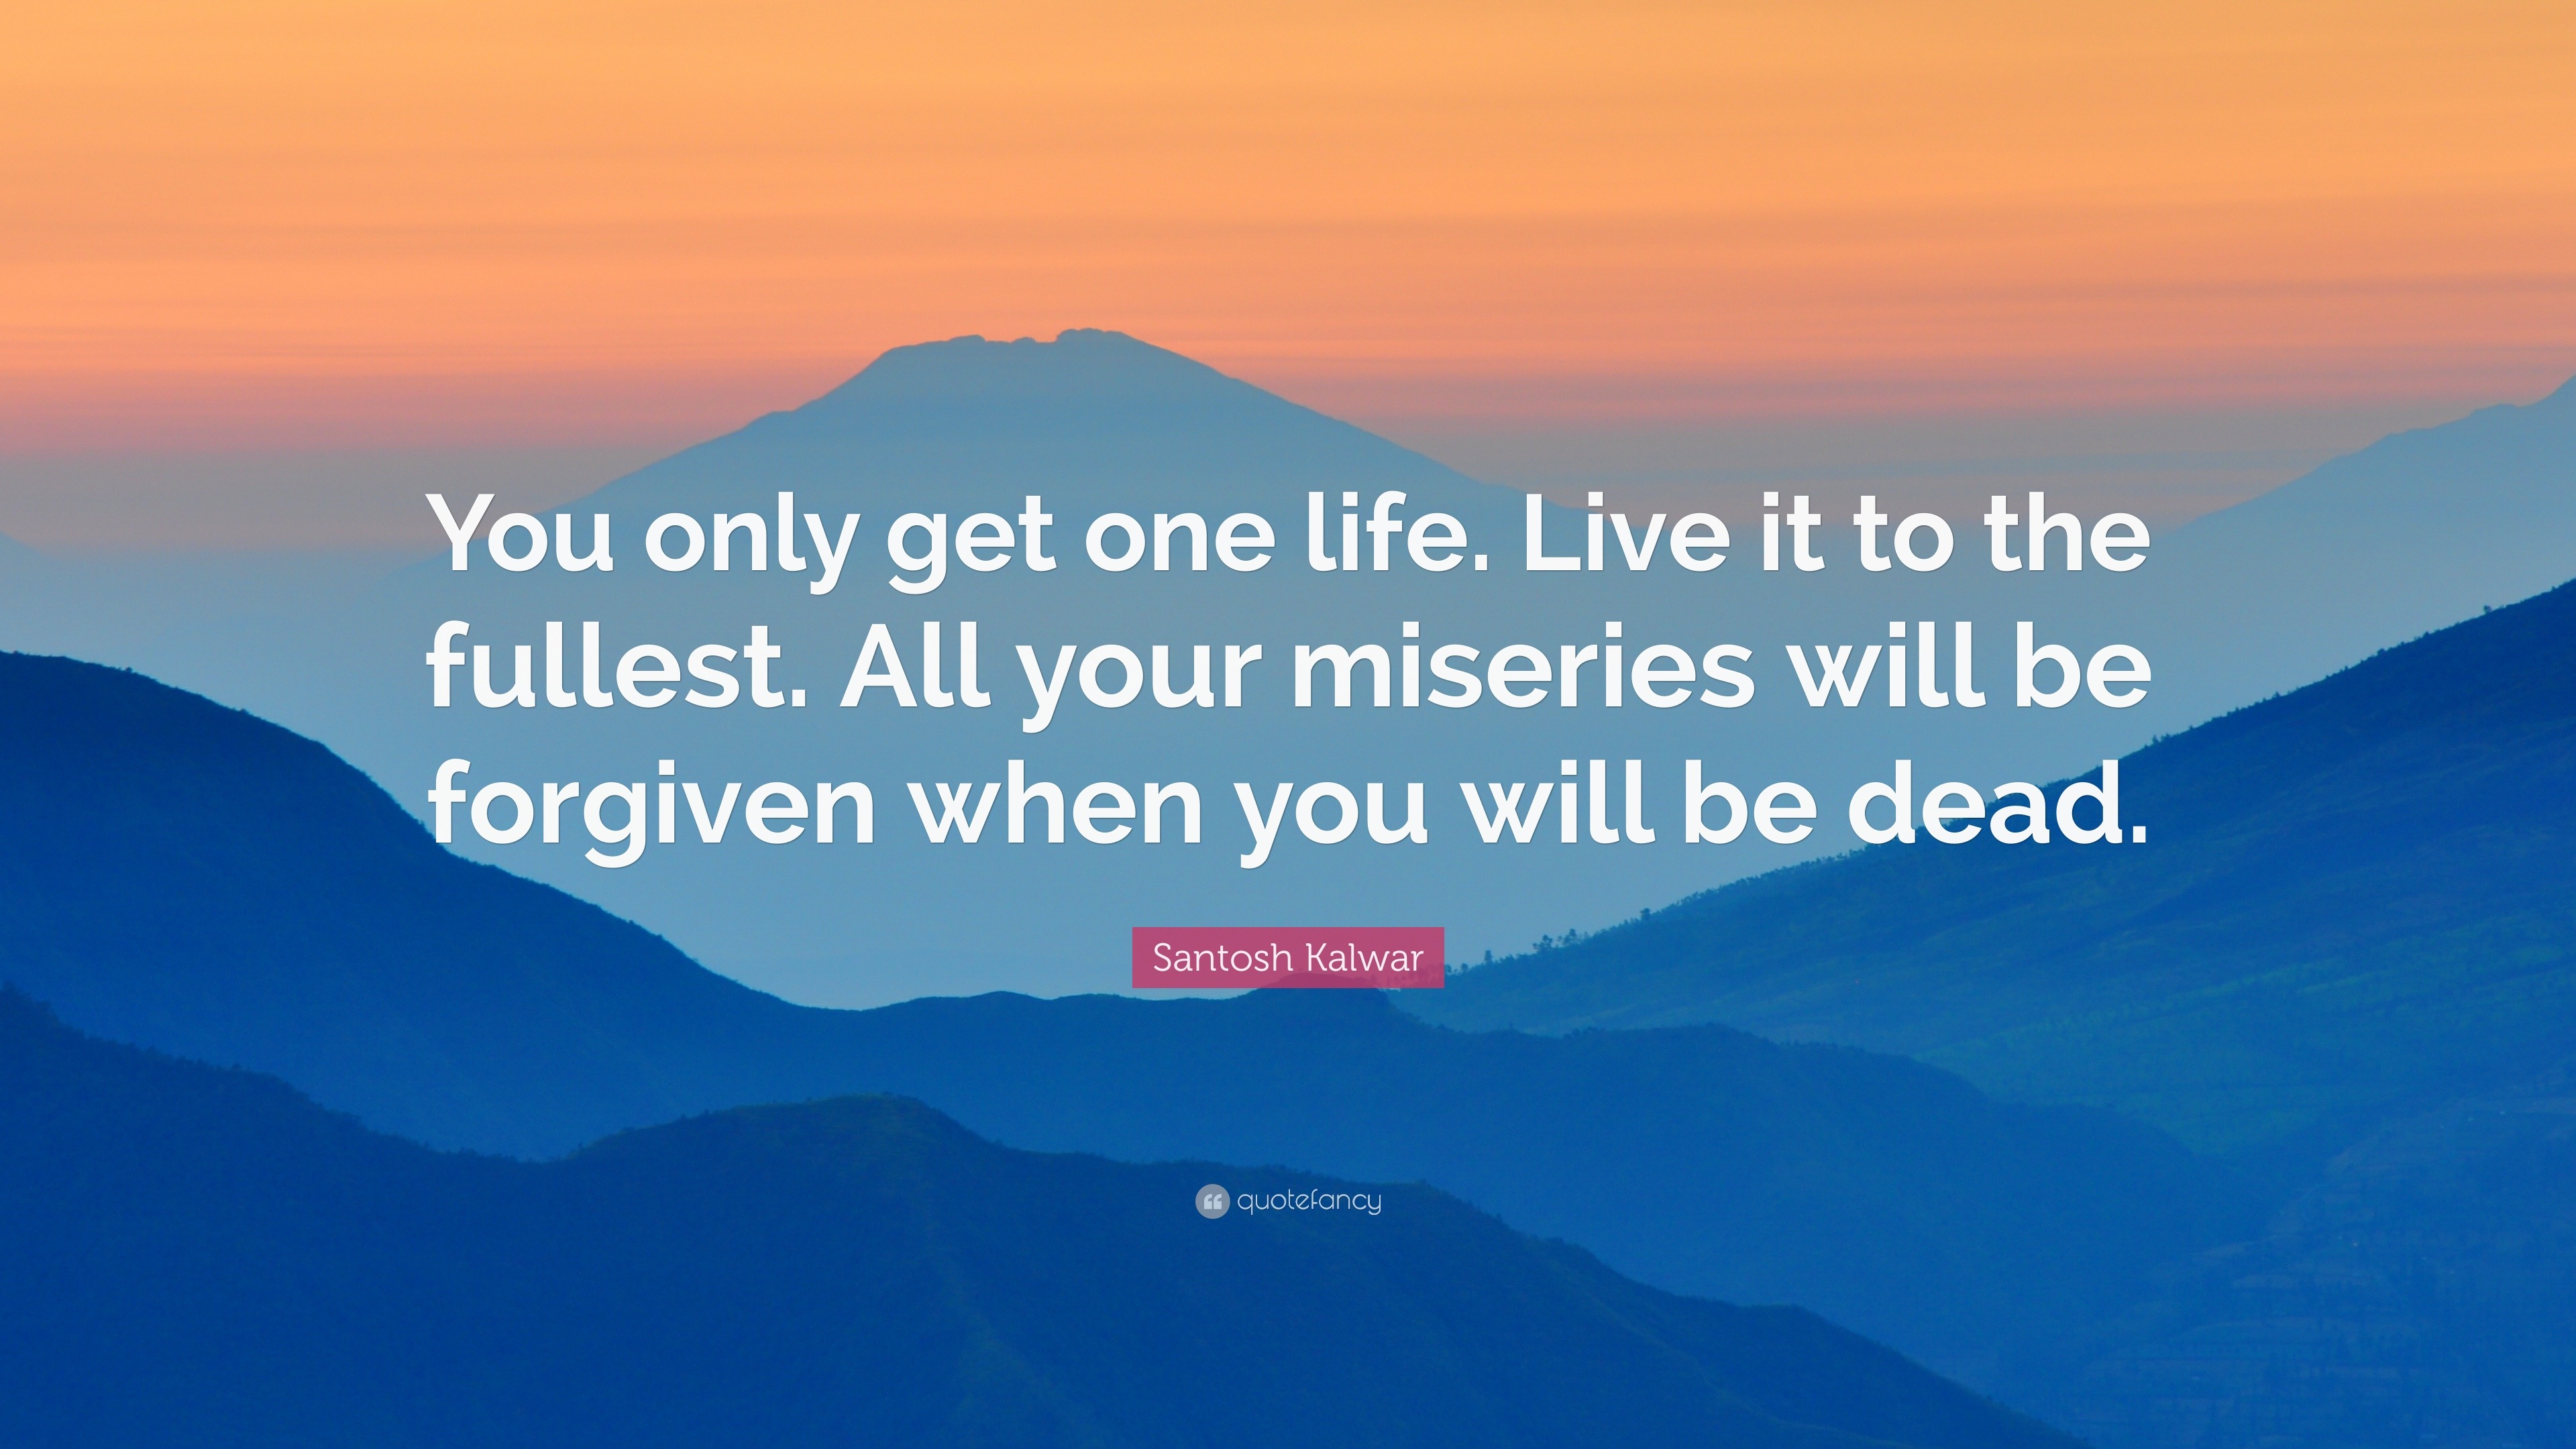 Santosh Kalwar Quote “You only one life Live it to the fullest